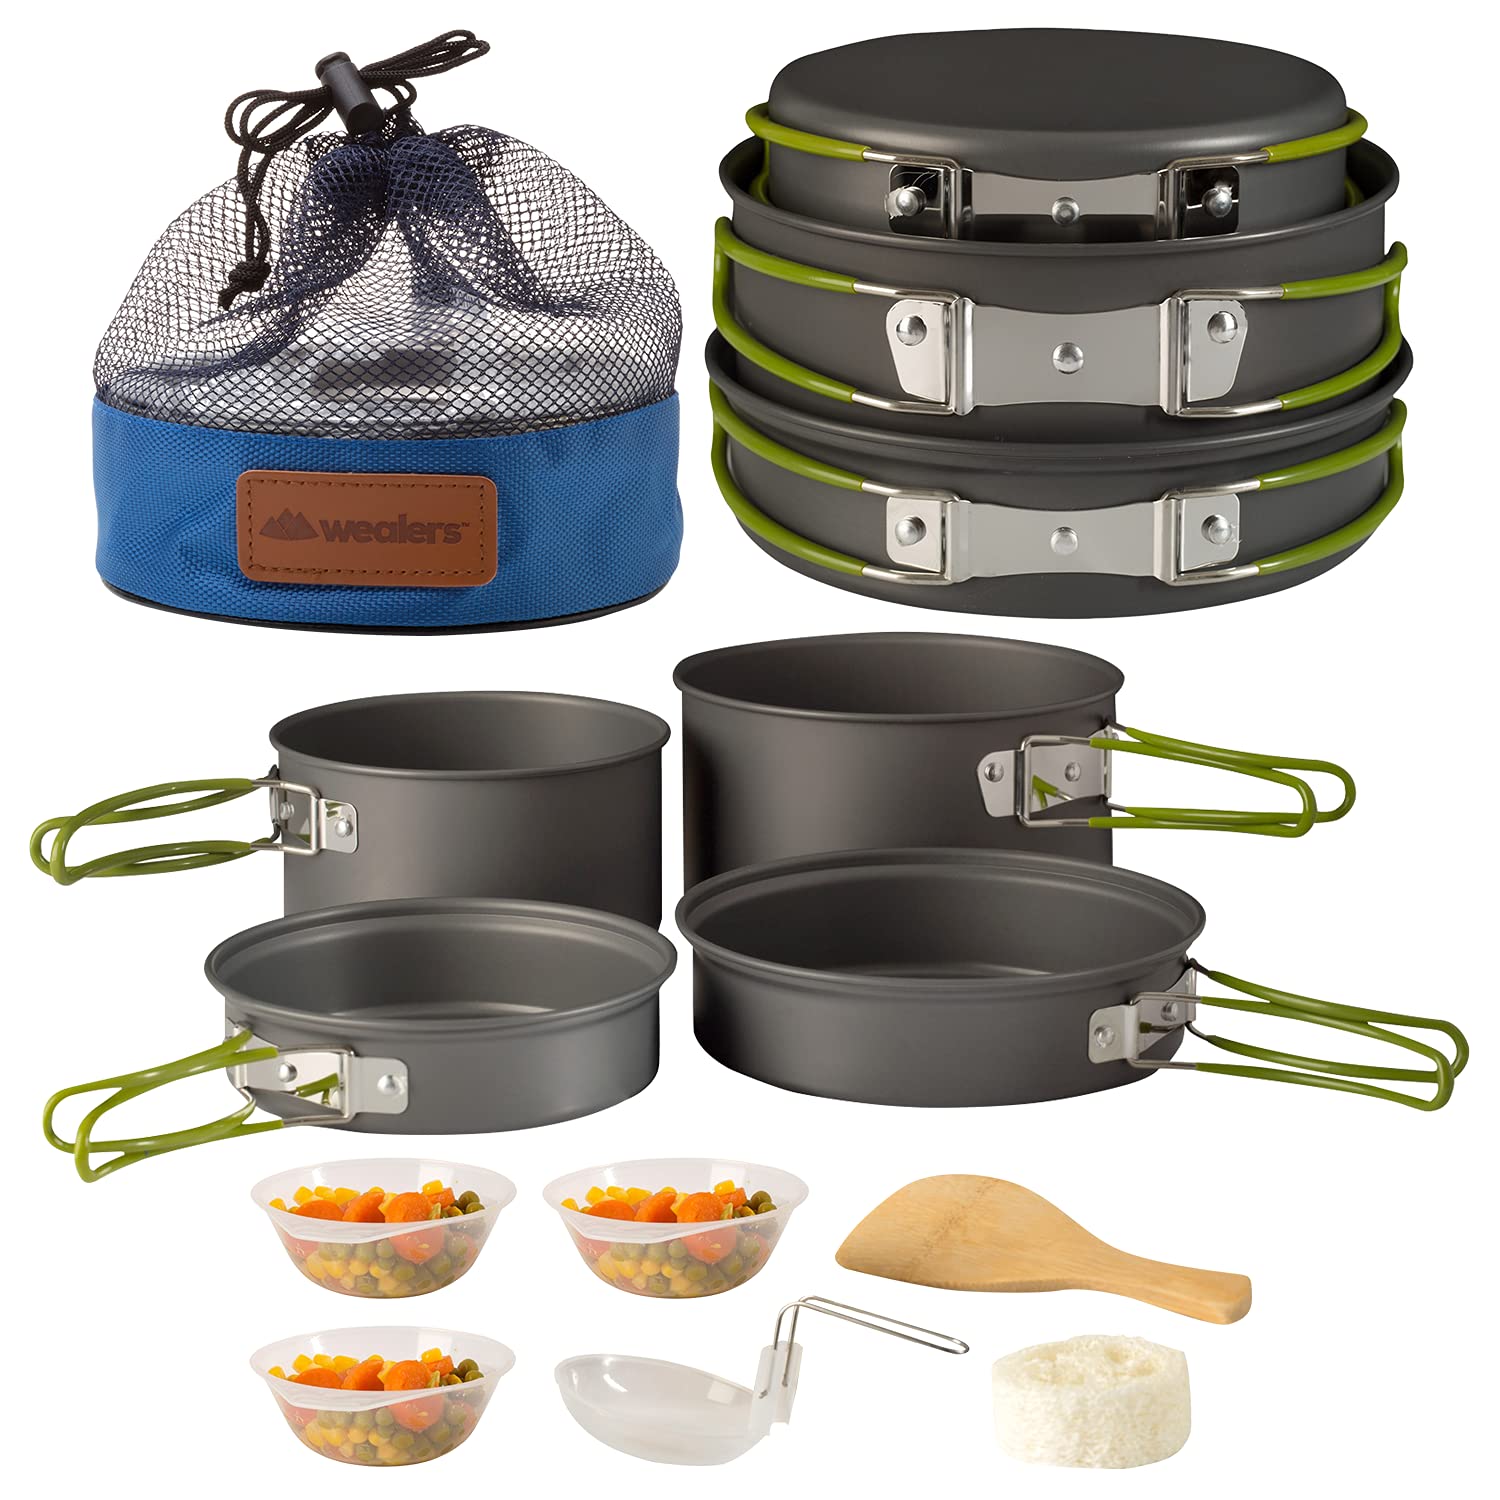 Wealers Camping Cookware 11 Piece Outdoor Mess Kit Backpacking| Trailblazing add on | Compact| Lightweight| Durable with Chef Pots, Bowls, Utensils and Mesh Carry Bag Included (11 Piece Set)  - Like New